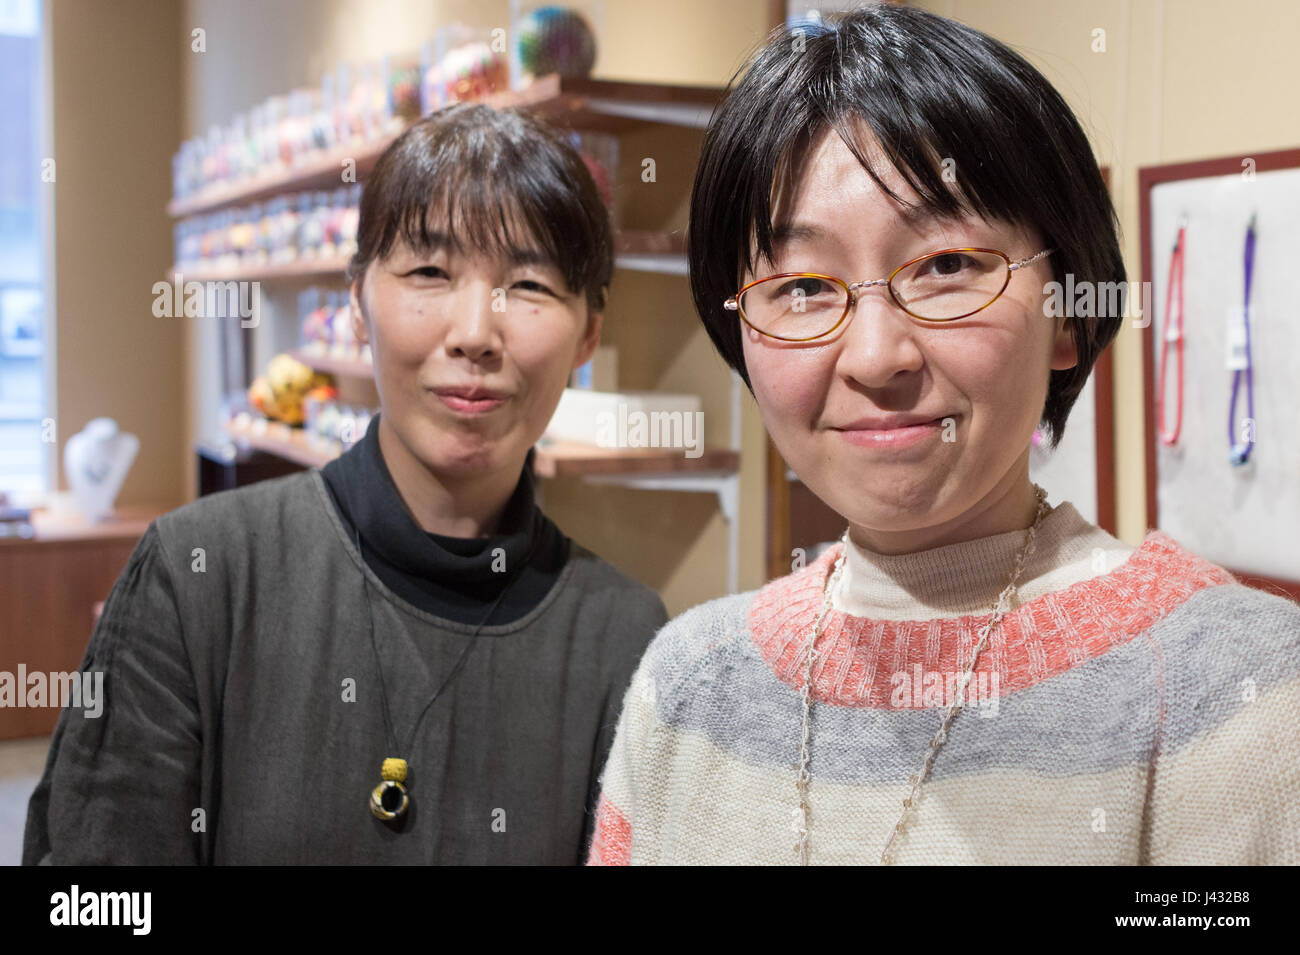 Kanazawa, Japan - March 30th, 2017: Portrait of two japanese woman working in a Kaga Yubinuki traditional store where they make the traditional thimble Stock Photo